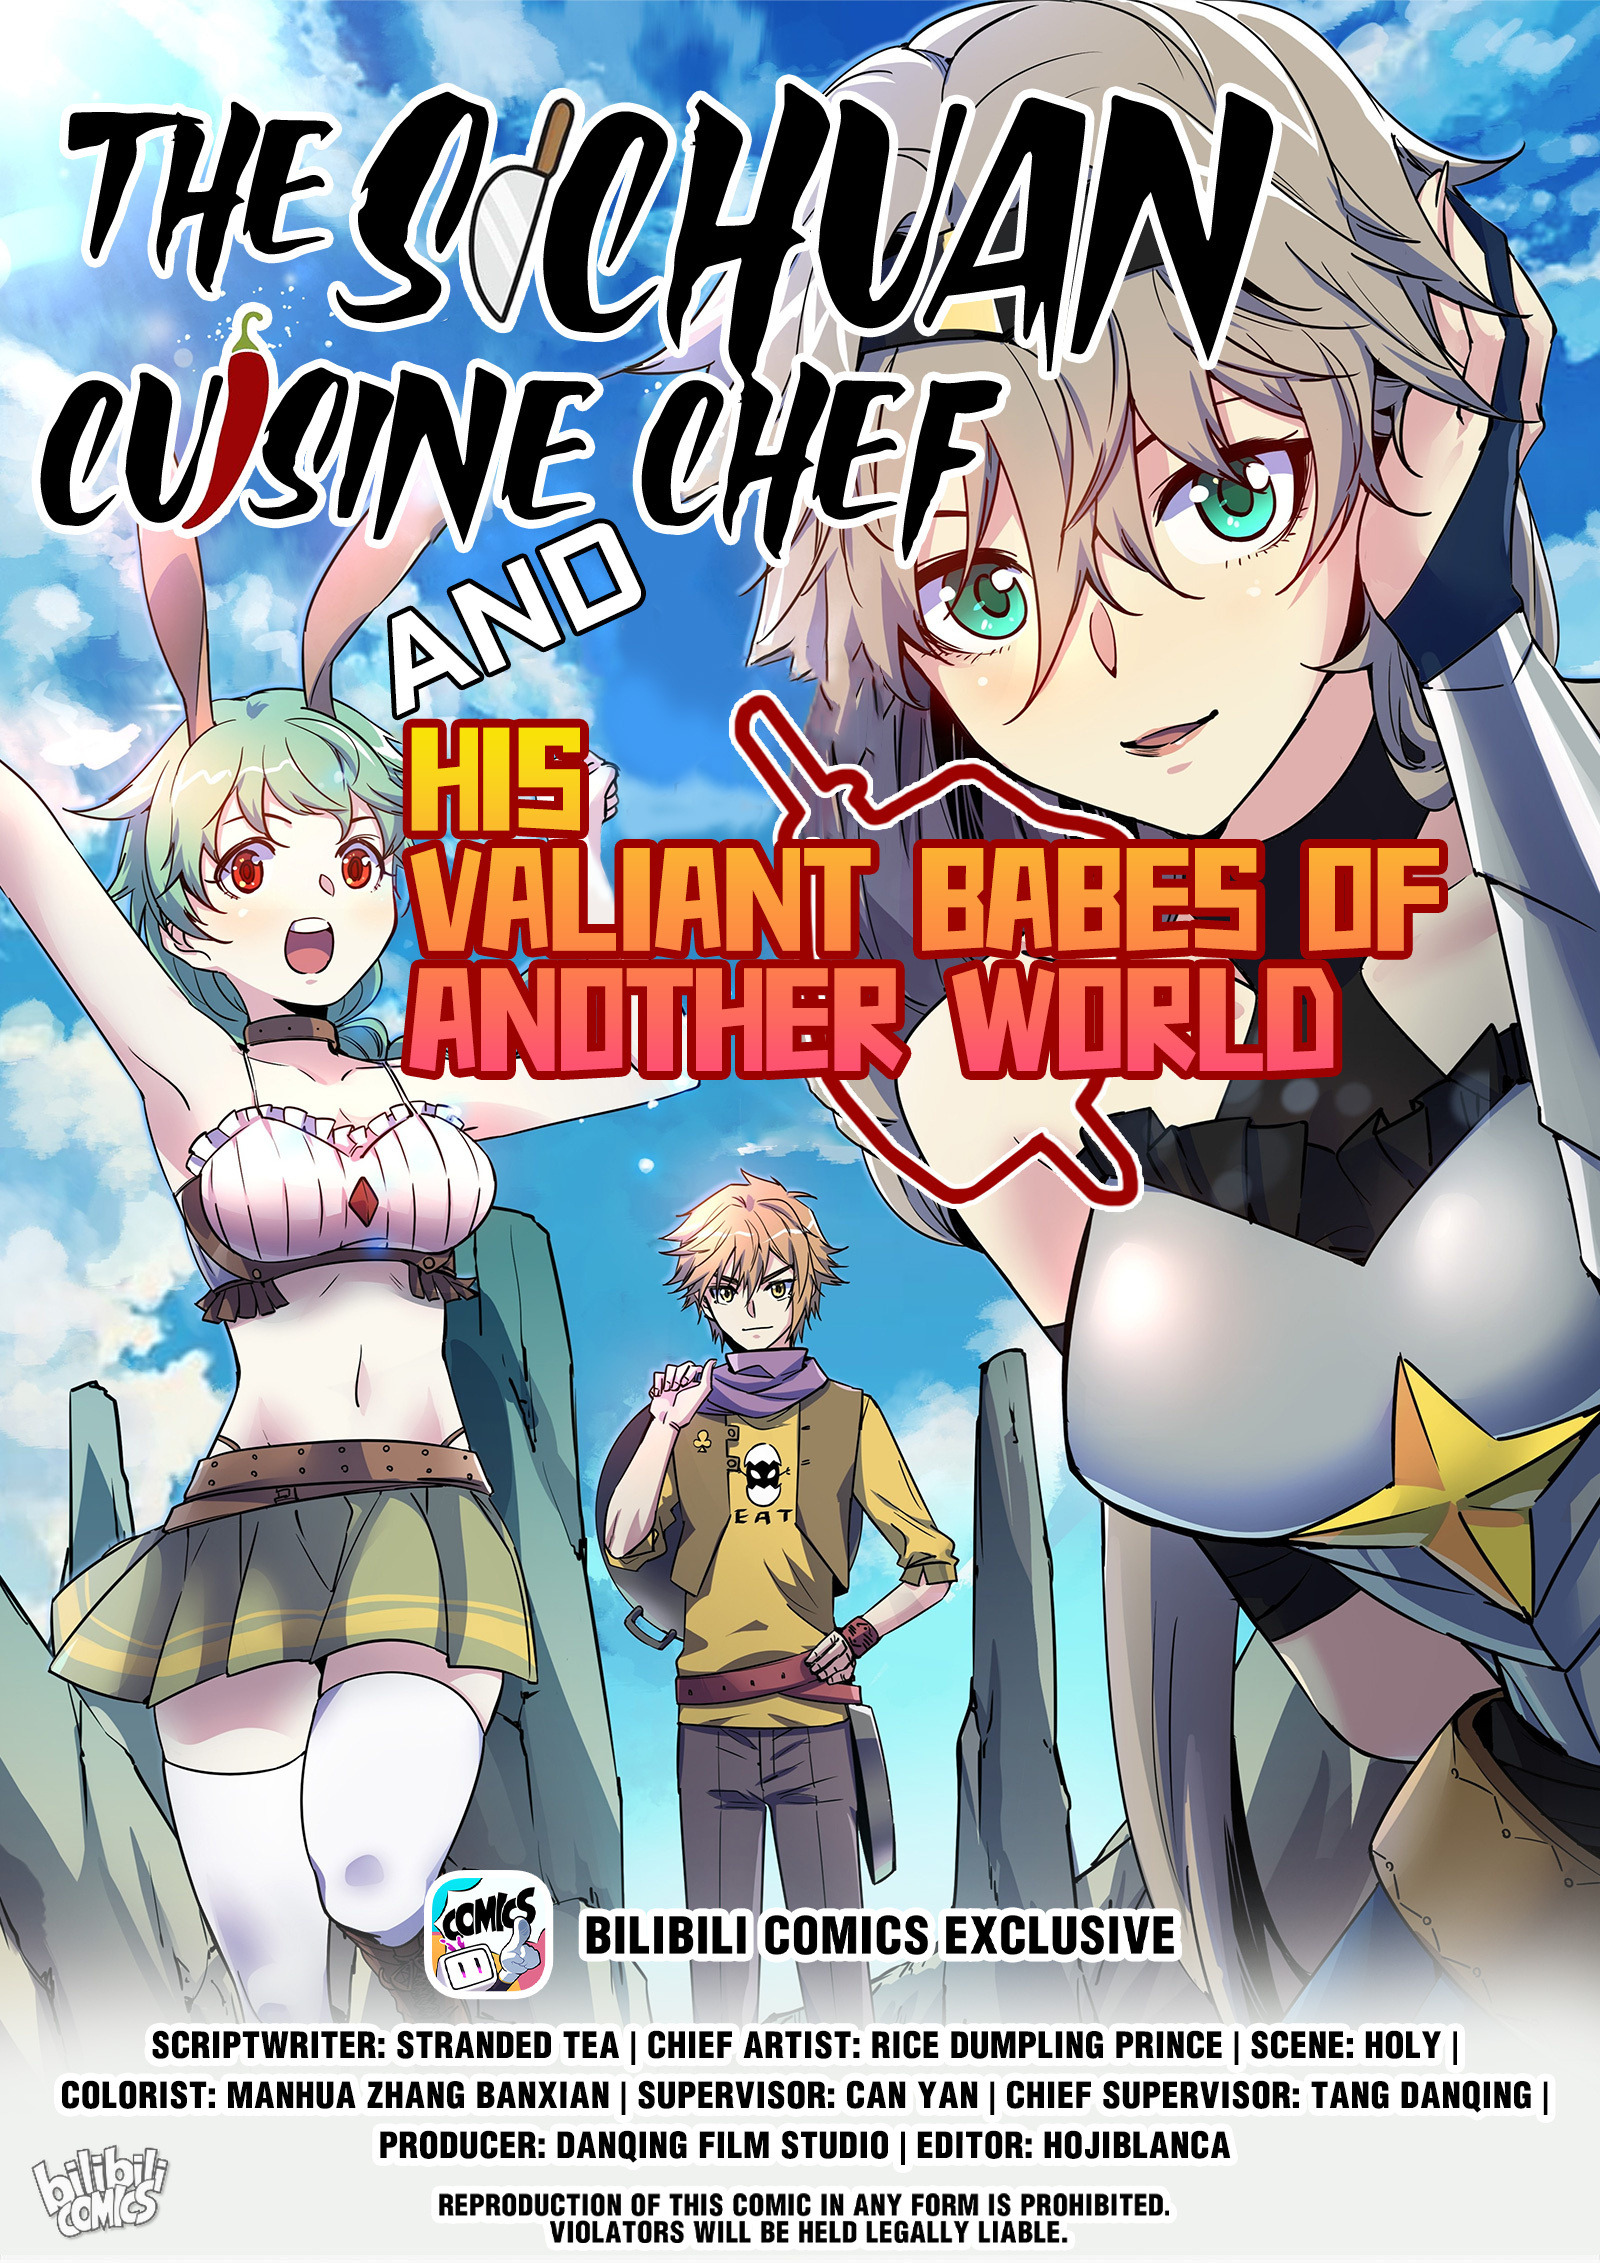 The Sichuan Cuisine Chef And His Valiant Babes Of Another World Chapter 0: You're An Incredible Man! - Picture 1